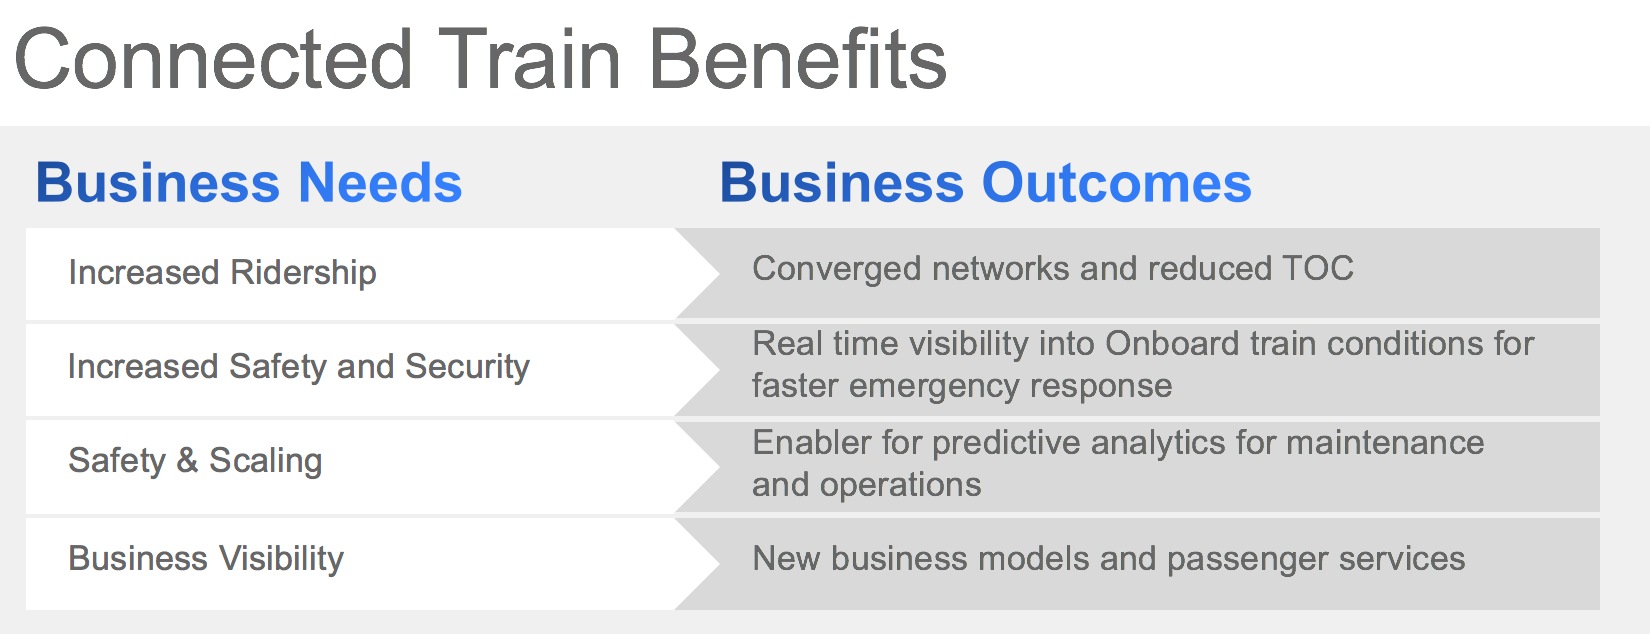 bulleted list of both business needs and business outcomes